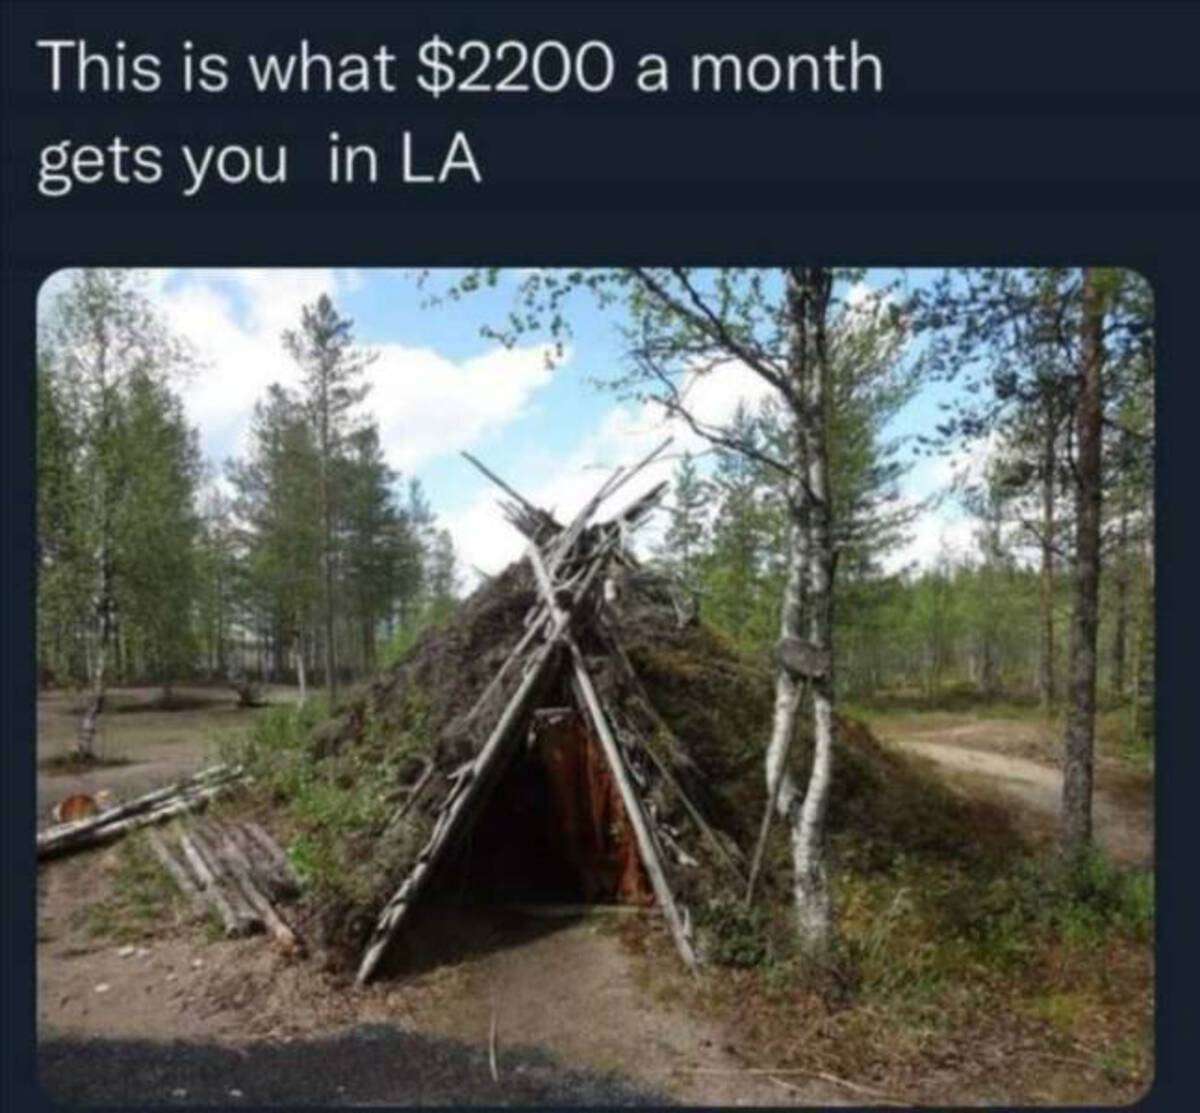 hut - This is what $2200 a month gets you in La